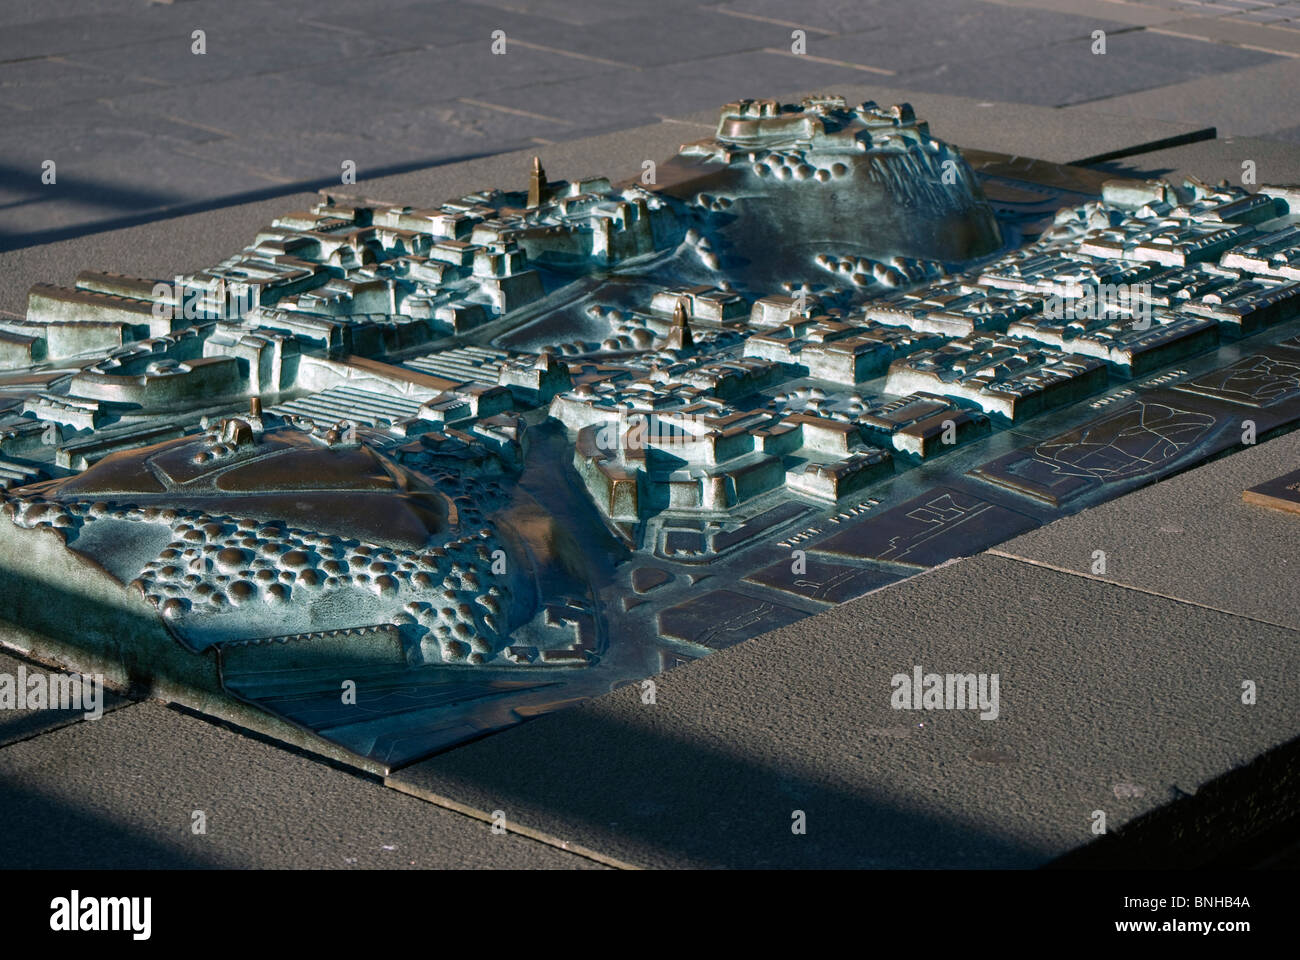 Relief model of the centre of Edinburgh, Scotland for the benefit of blind people. Stock Photo